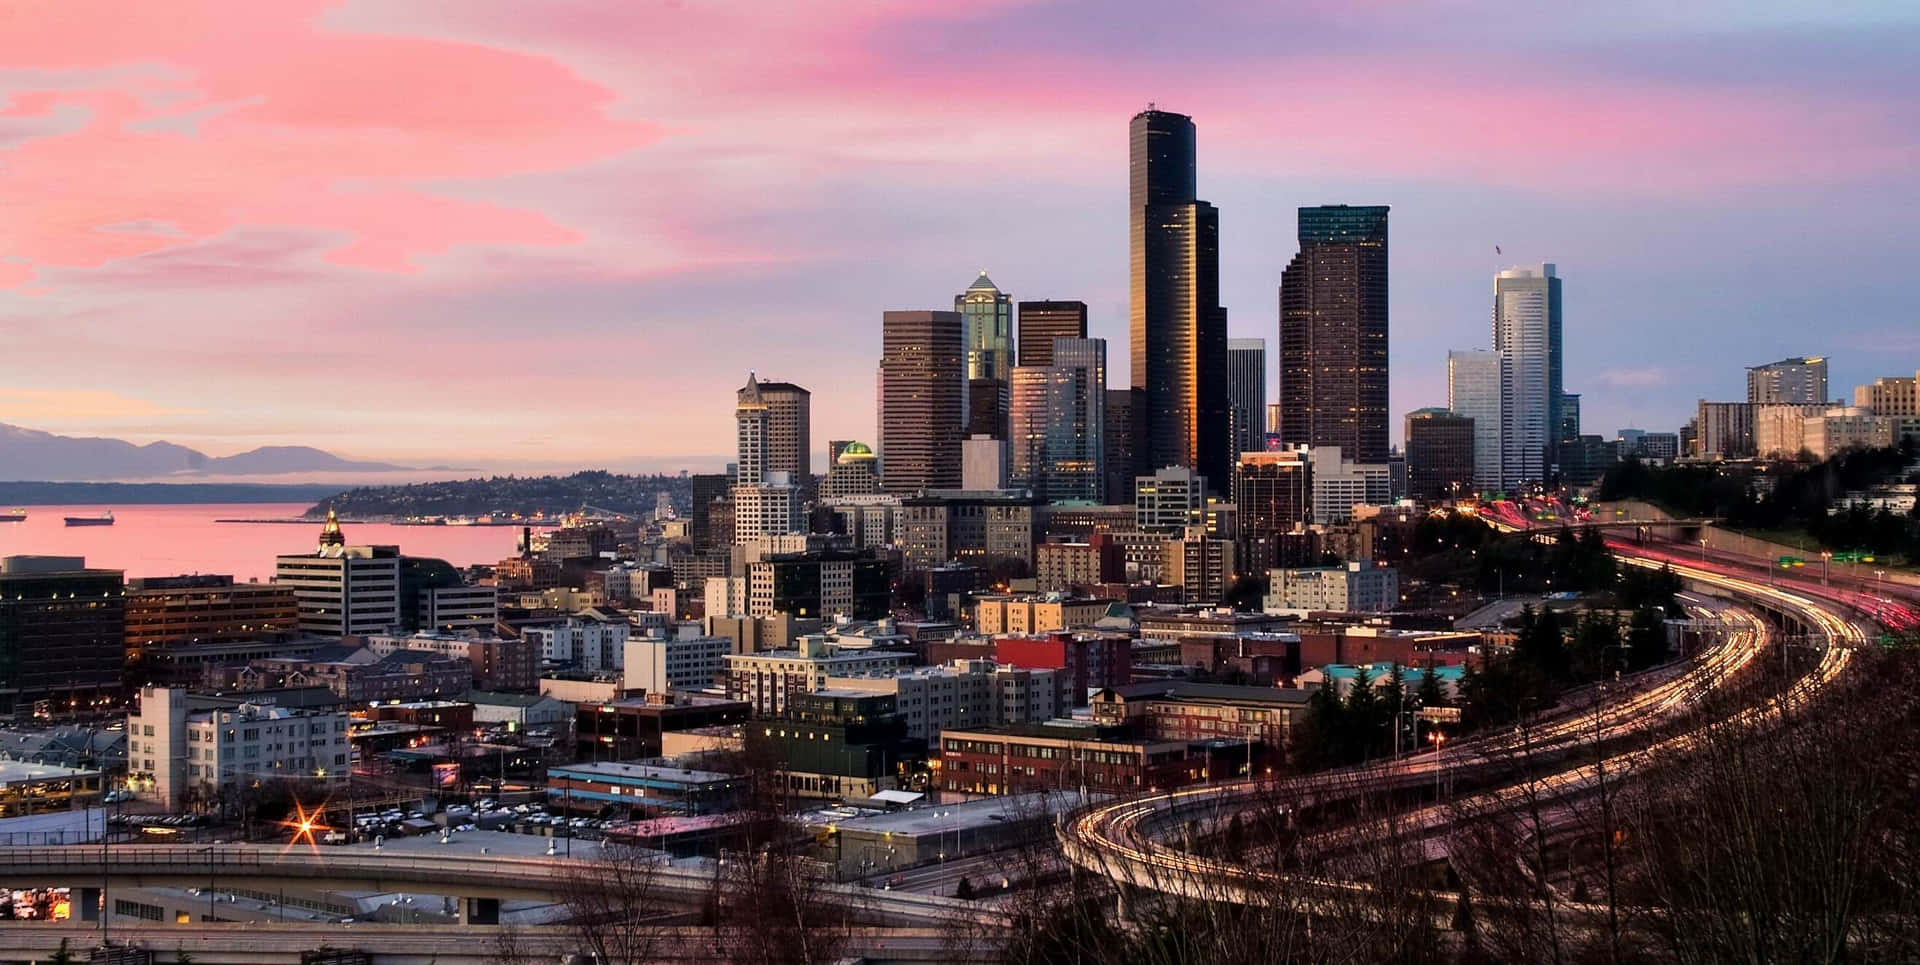 The City of Seattle at Dusk Wallpaper